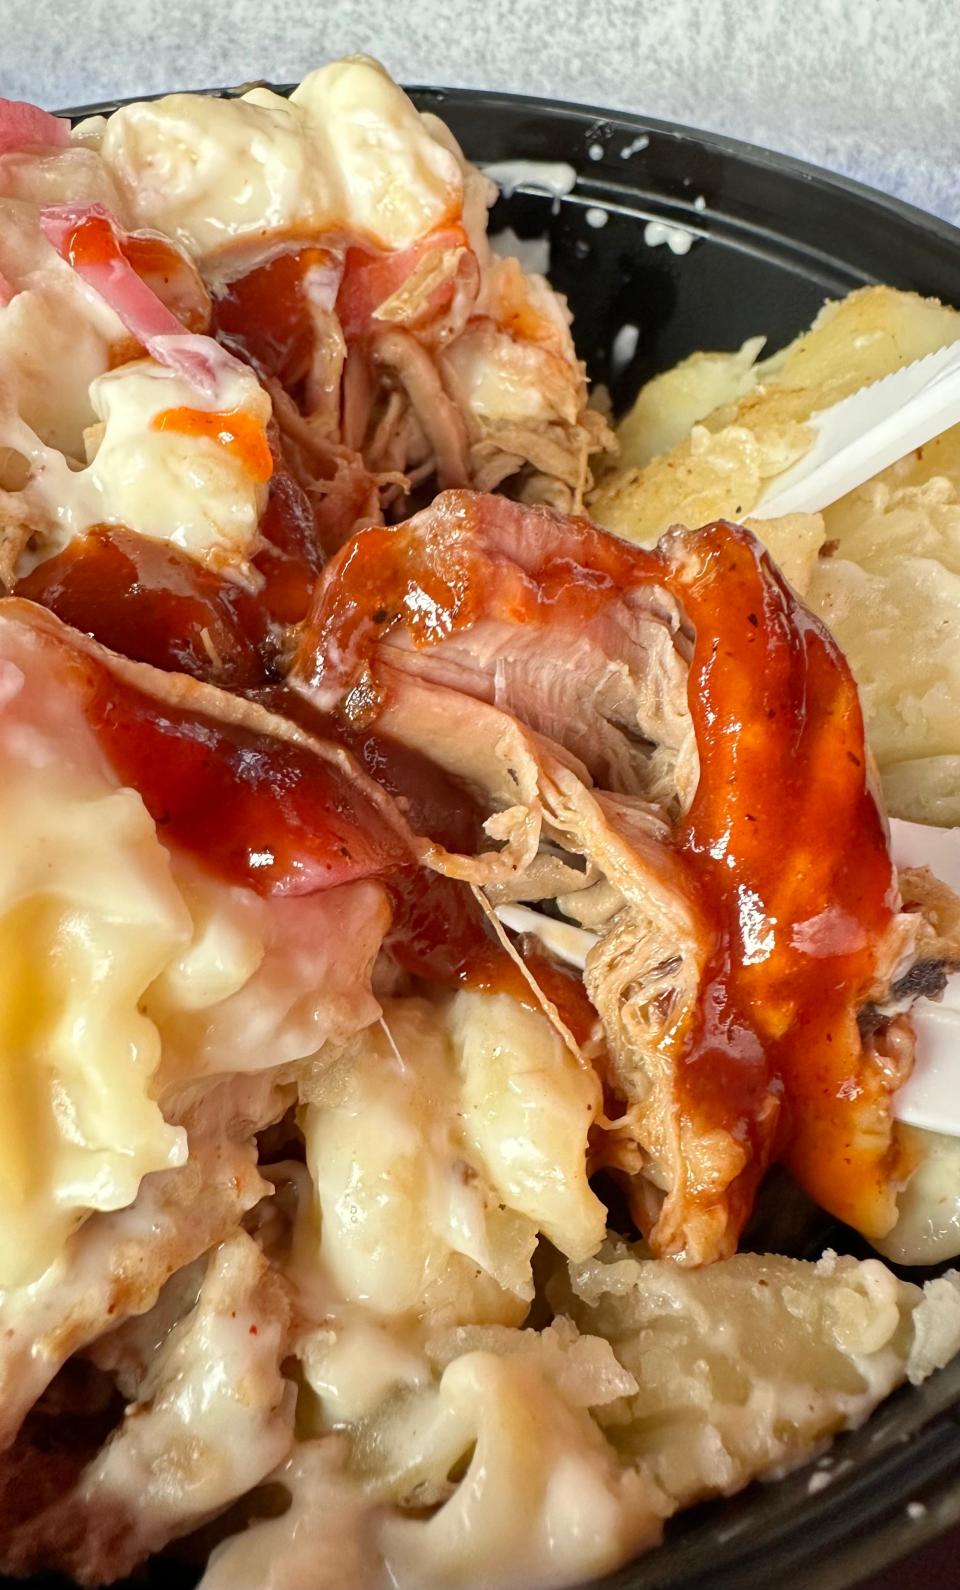 Slow-roasted, tender pulled pork combine with sides of extra white cheddar mac & cheese and Memphis sauce in a bowl served up at The Blazing Pig in Jackson Township.